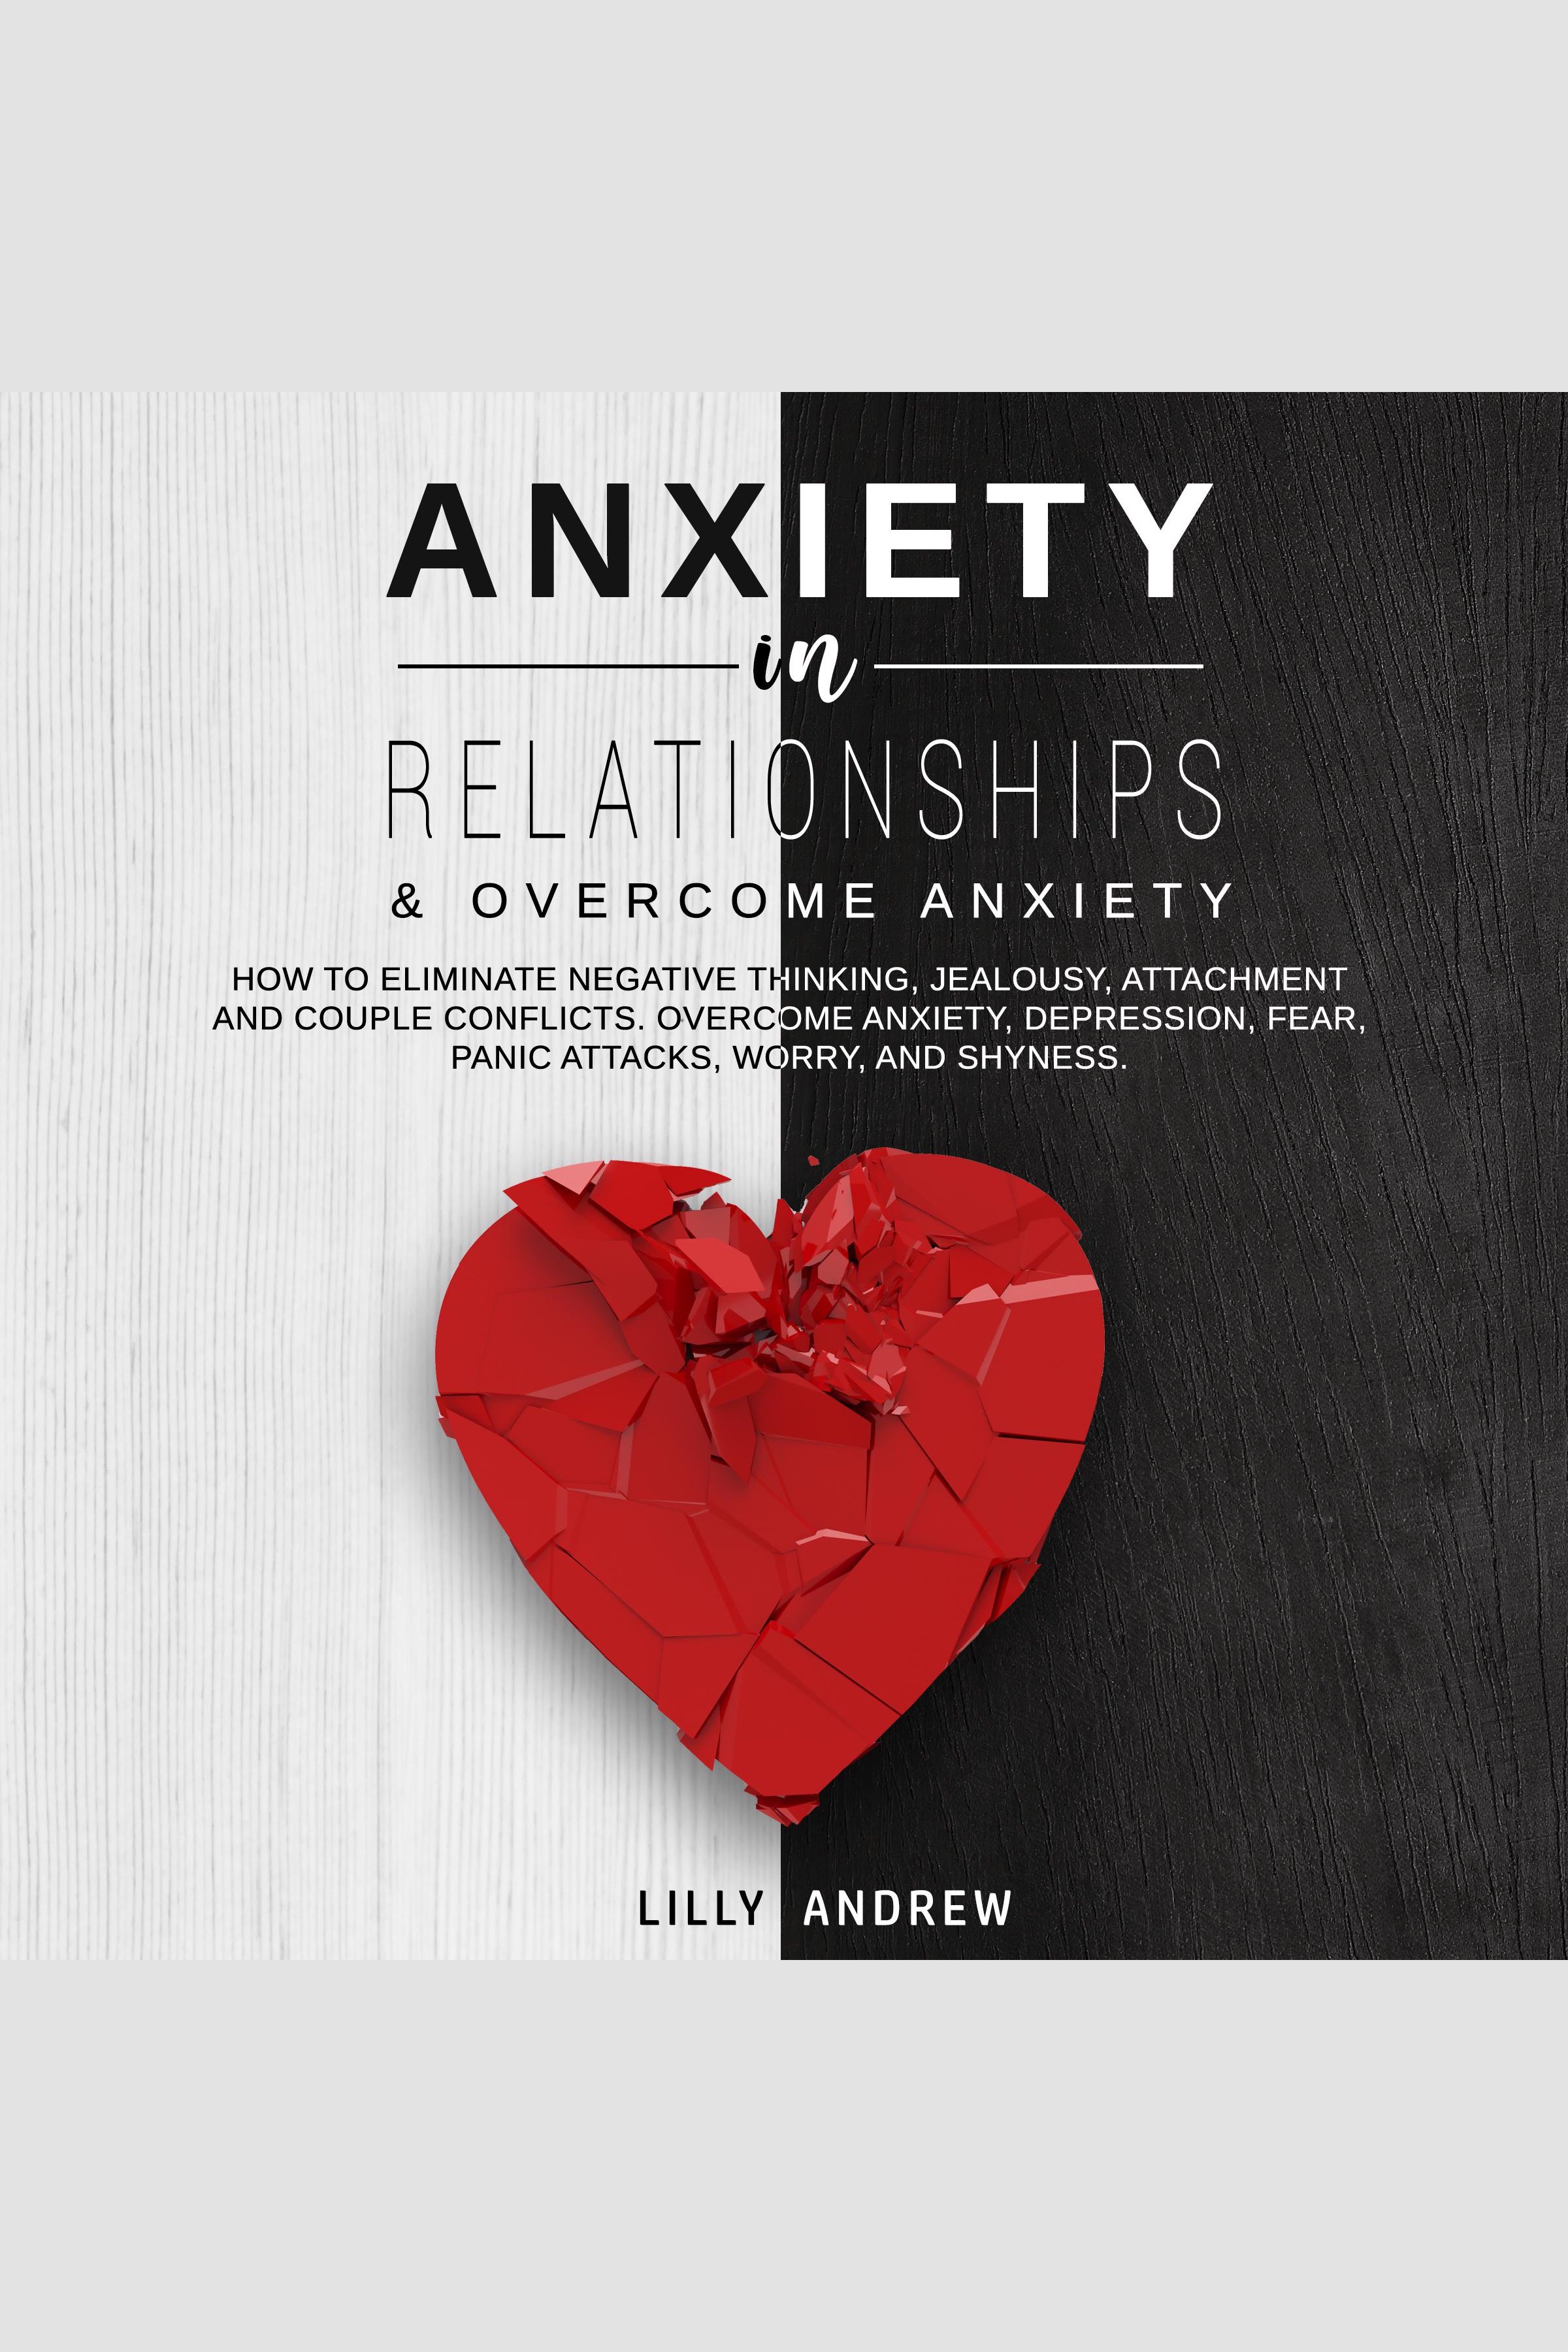 Anxiety in Relationships & Overcome Anxiety How to Eliminate Negative Thinking, Jealousy, Attachment and Couple Conflicts. Overcome Anxiety, Depression, Fear, Panic attacks, Worry, and Shyness cover image